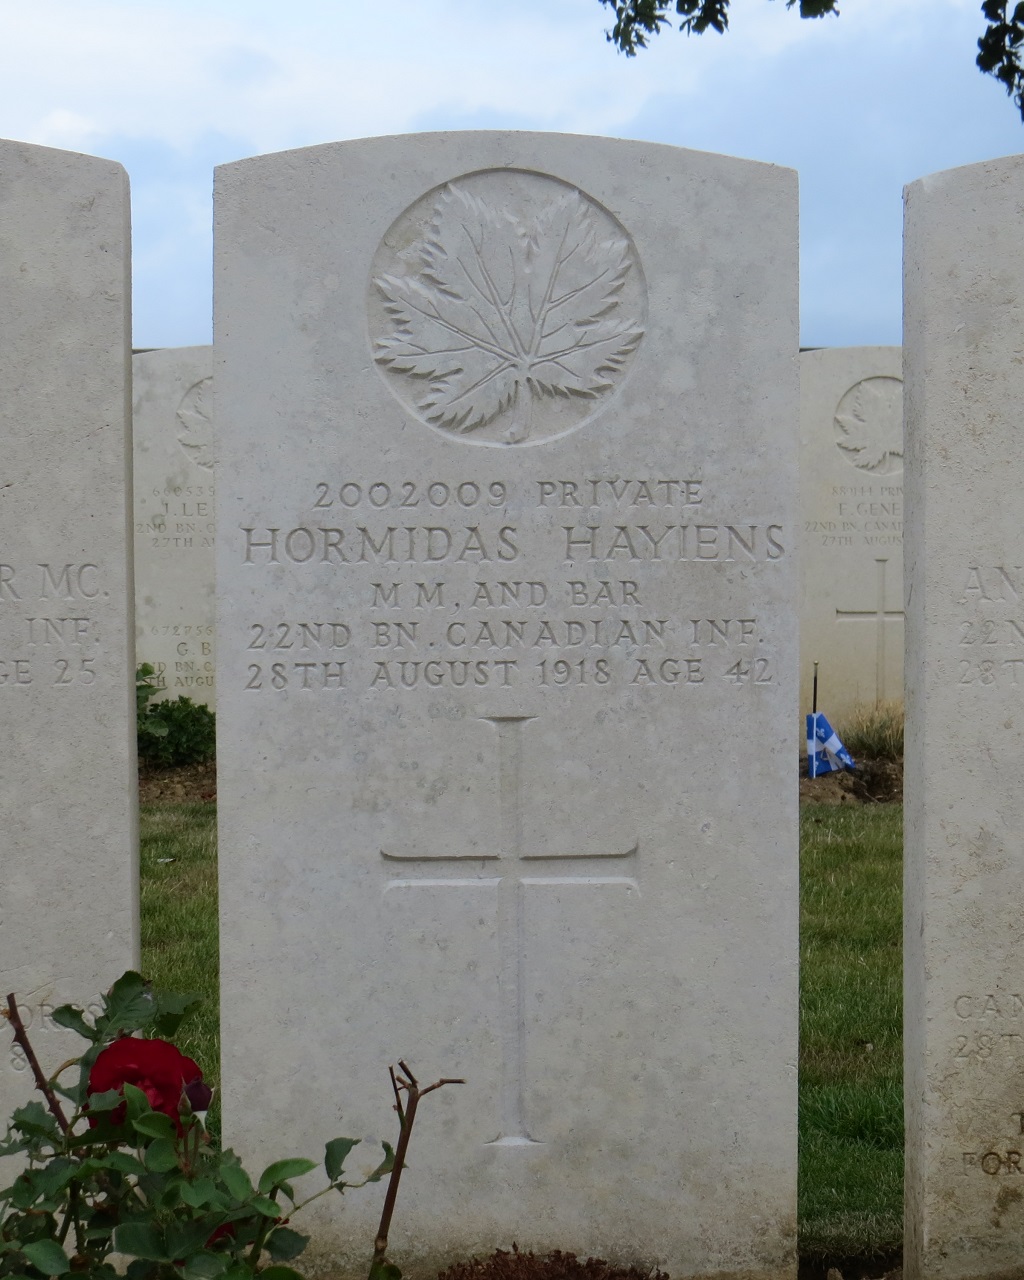 Private Hormisdas Haynes MM and Bar in the Great War